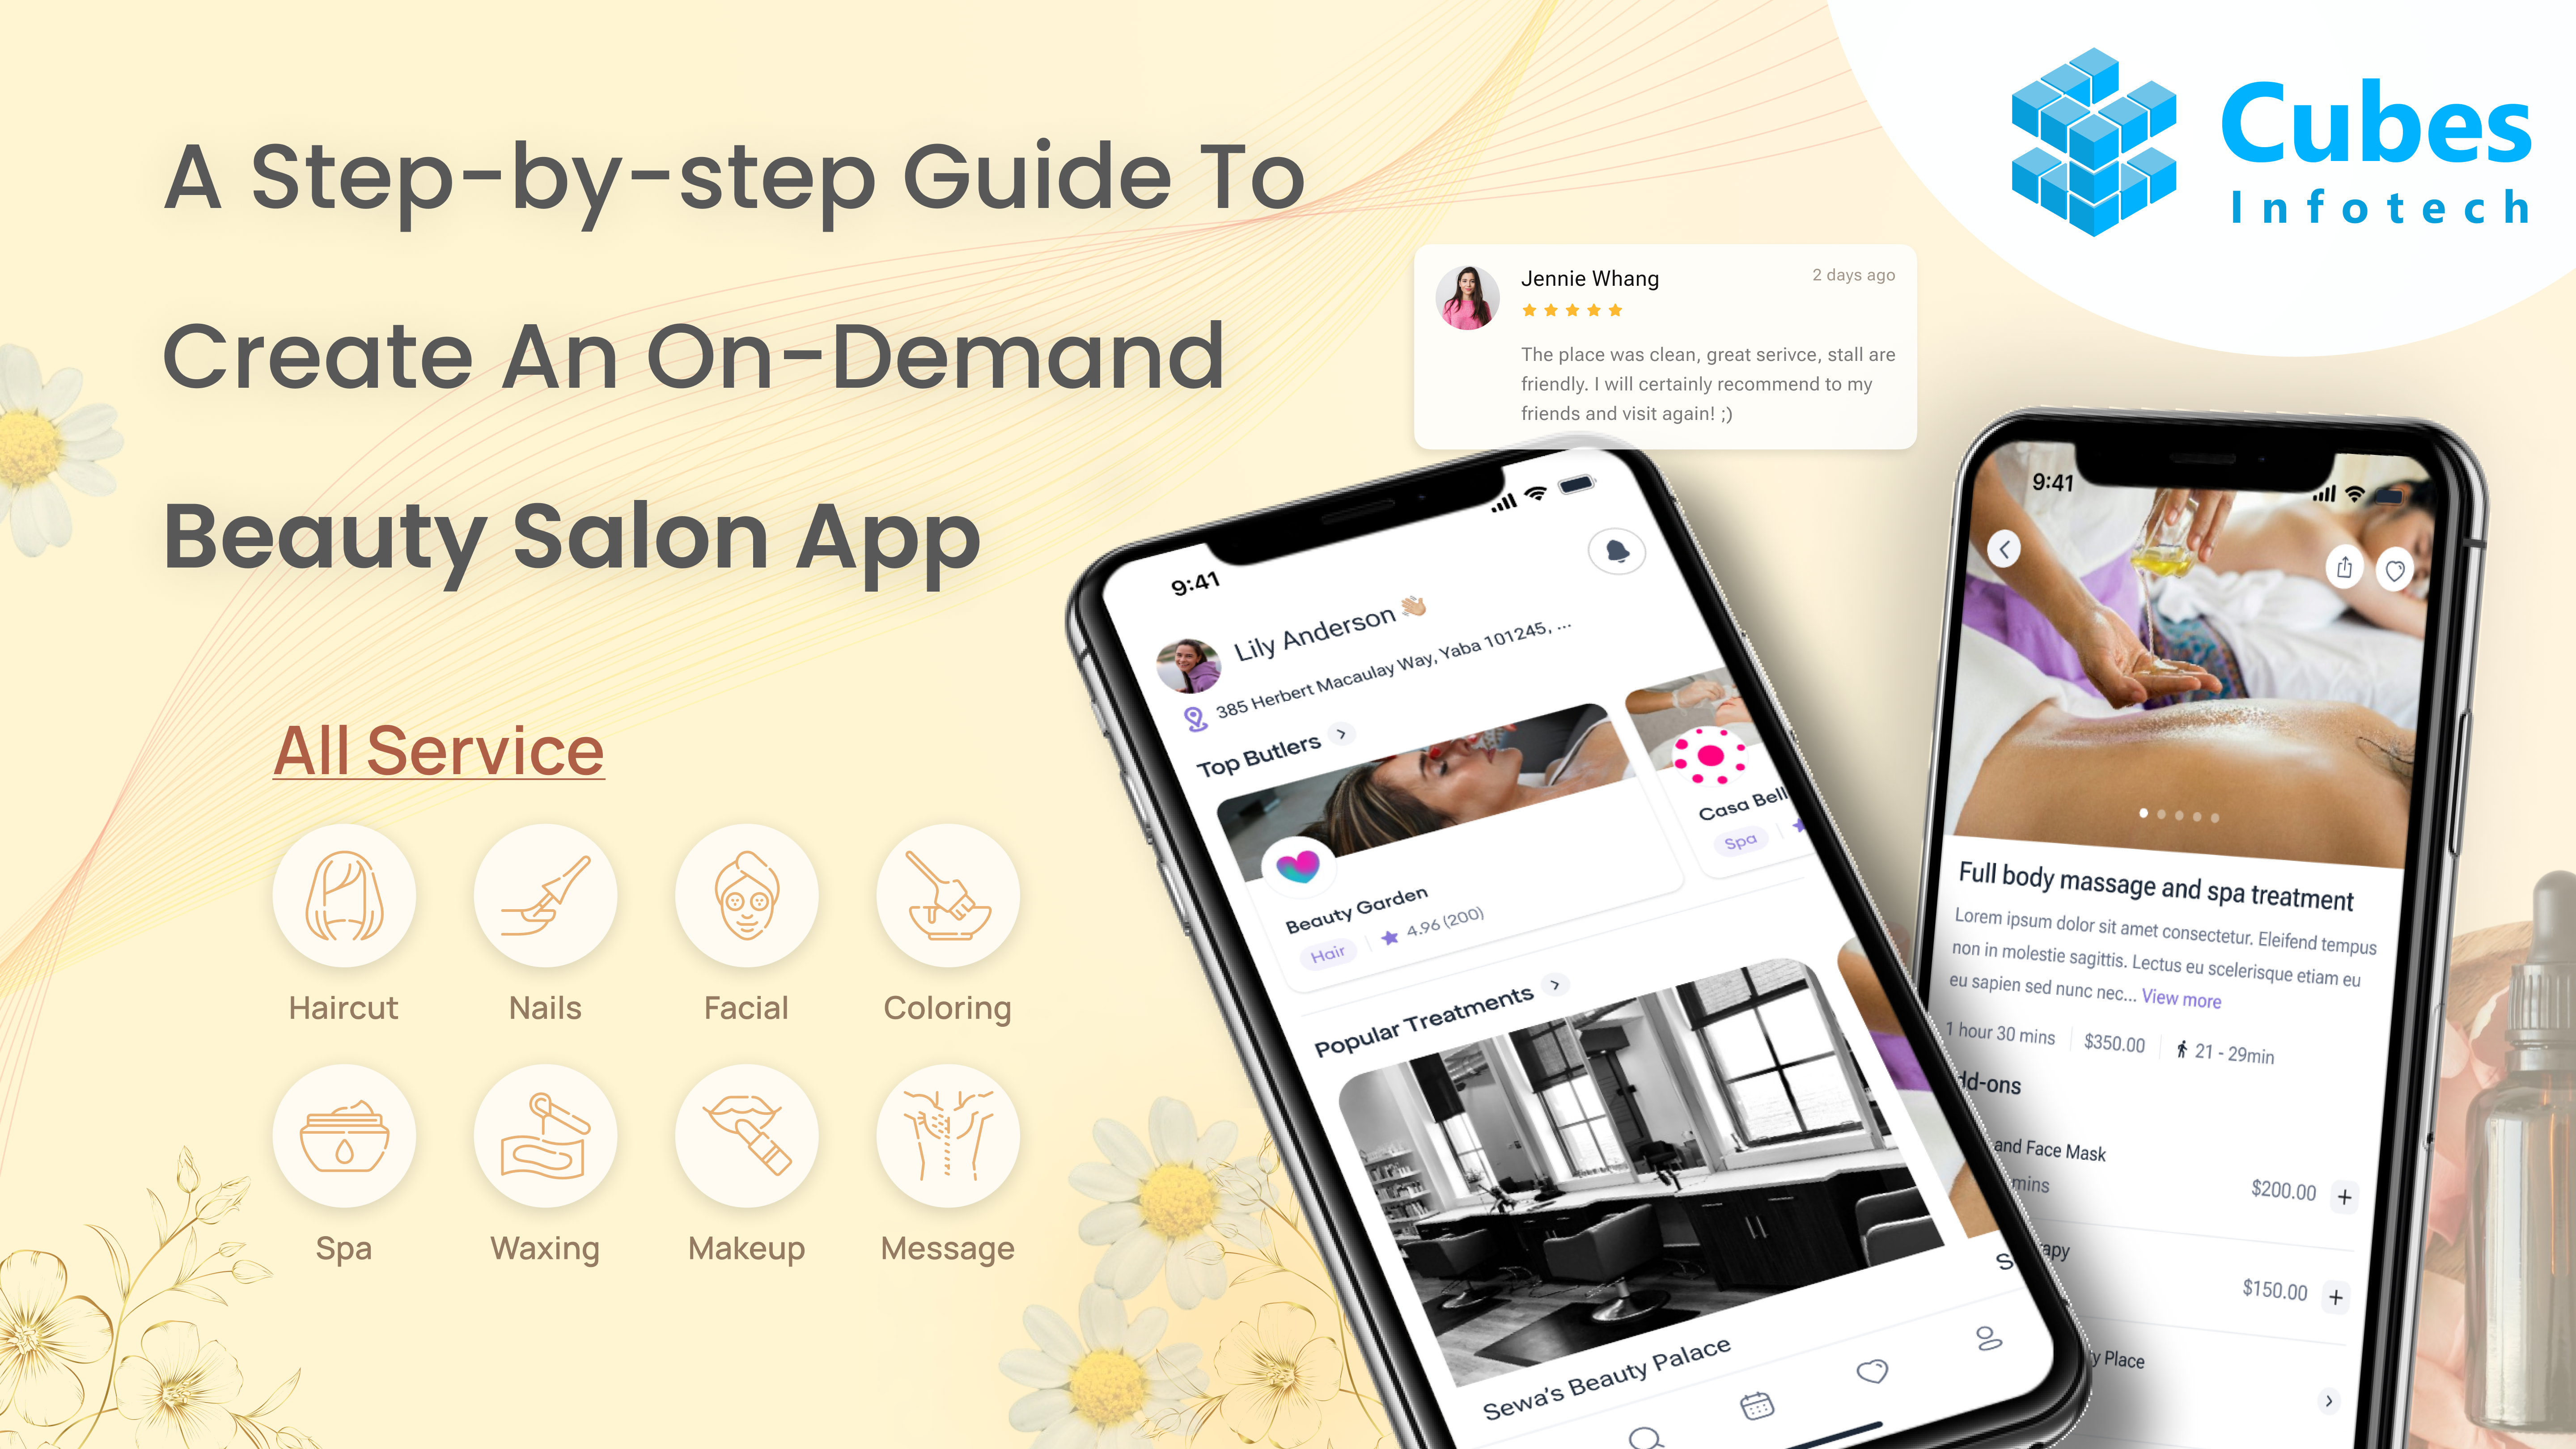 A Step-by-step Guide To Create An On-Demand Beauty Salon App